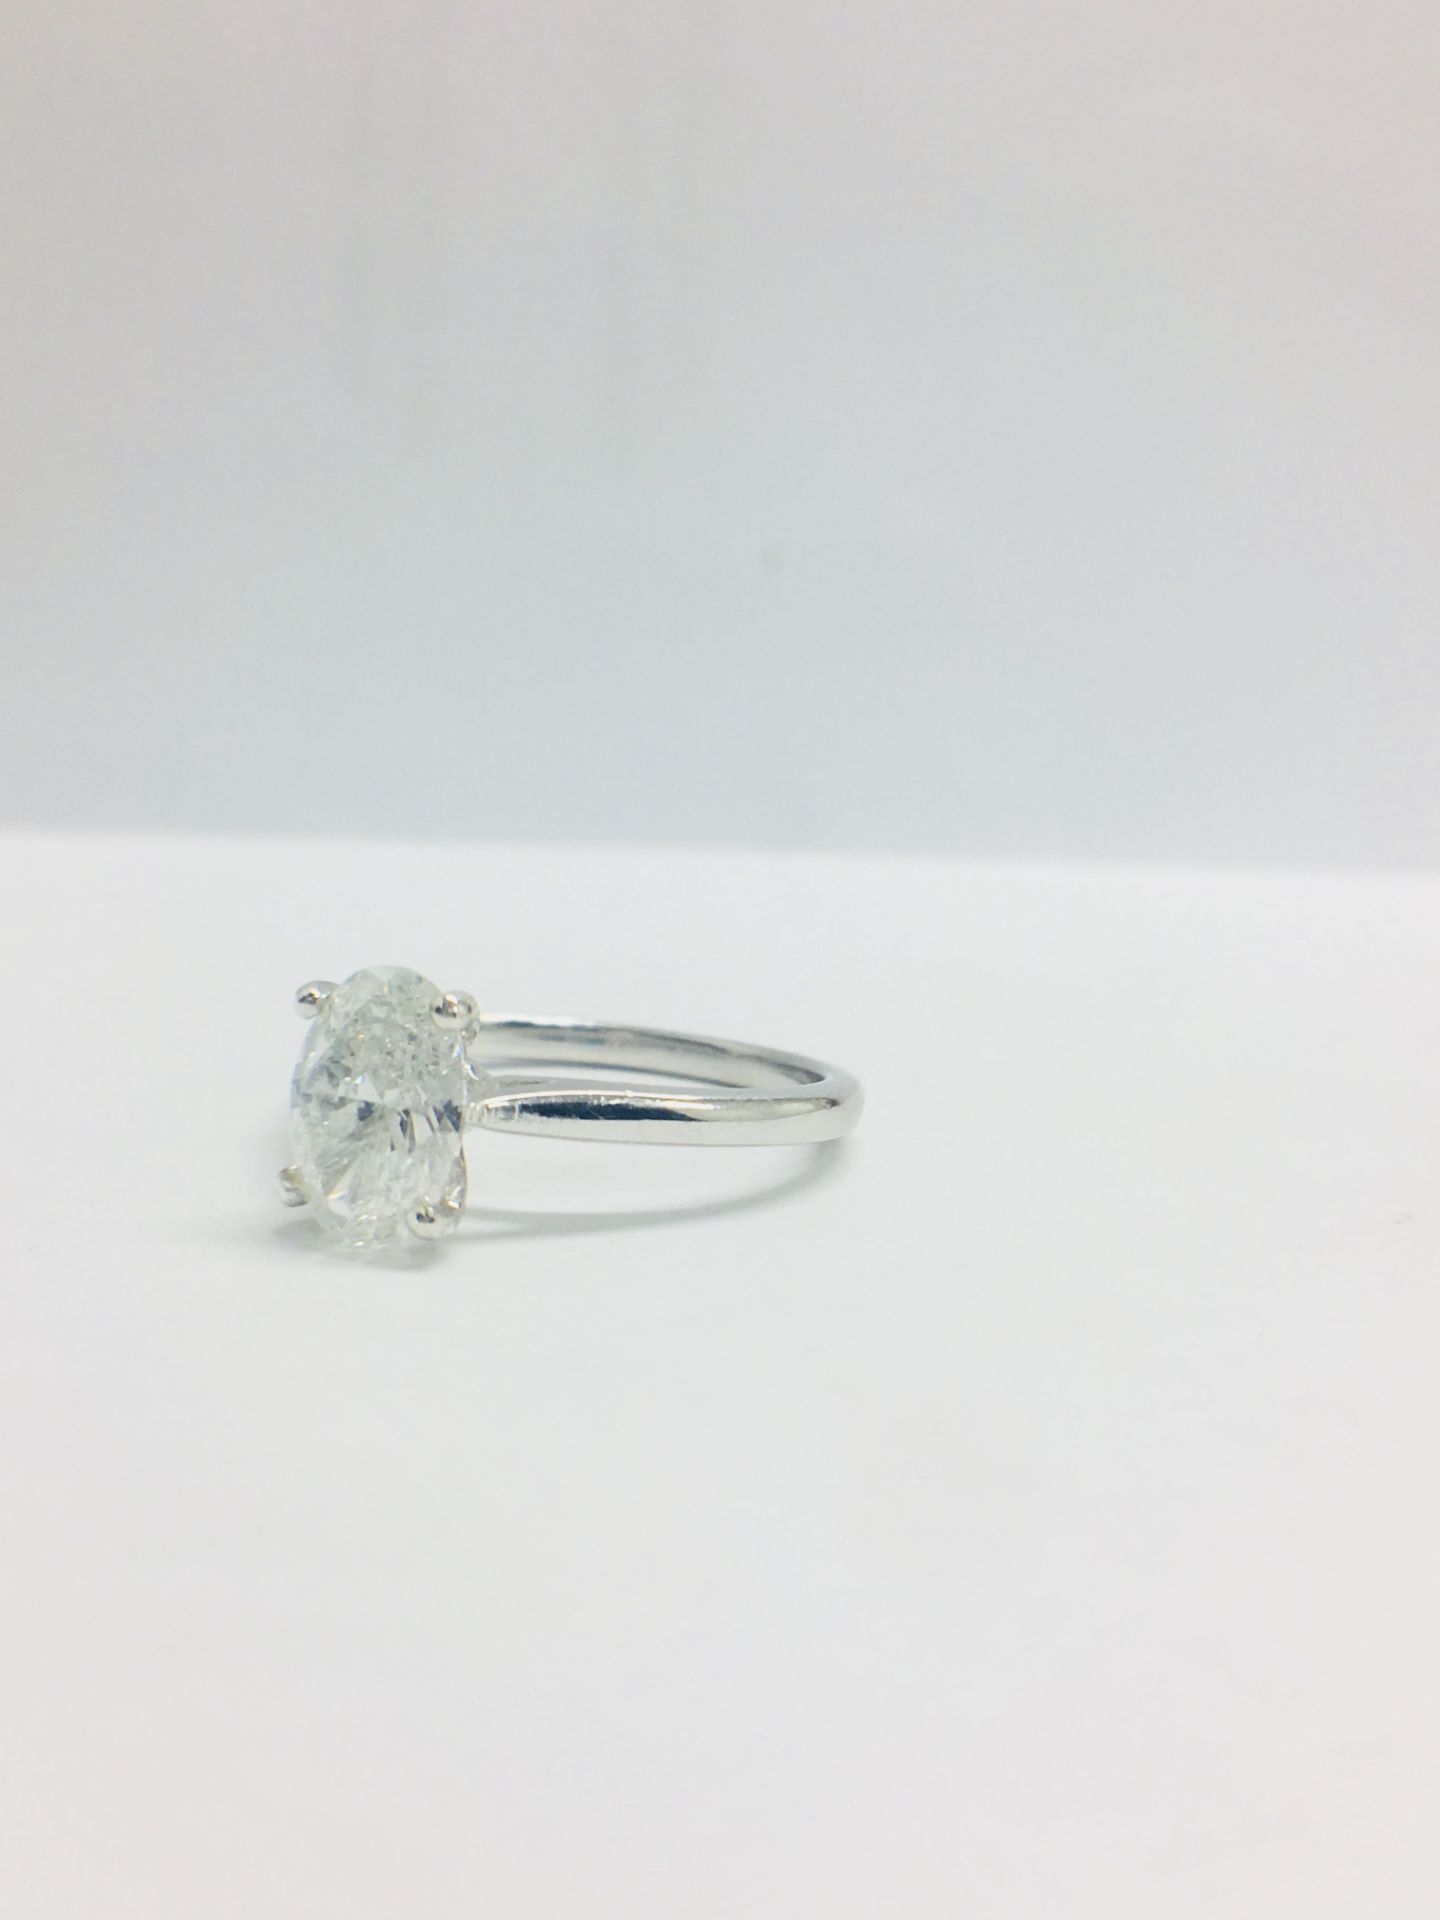 1Ct Oval Cut Diamond Solitaire Ring, - Image 2 of 11